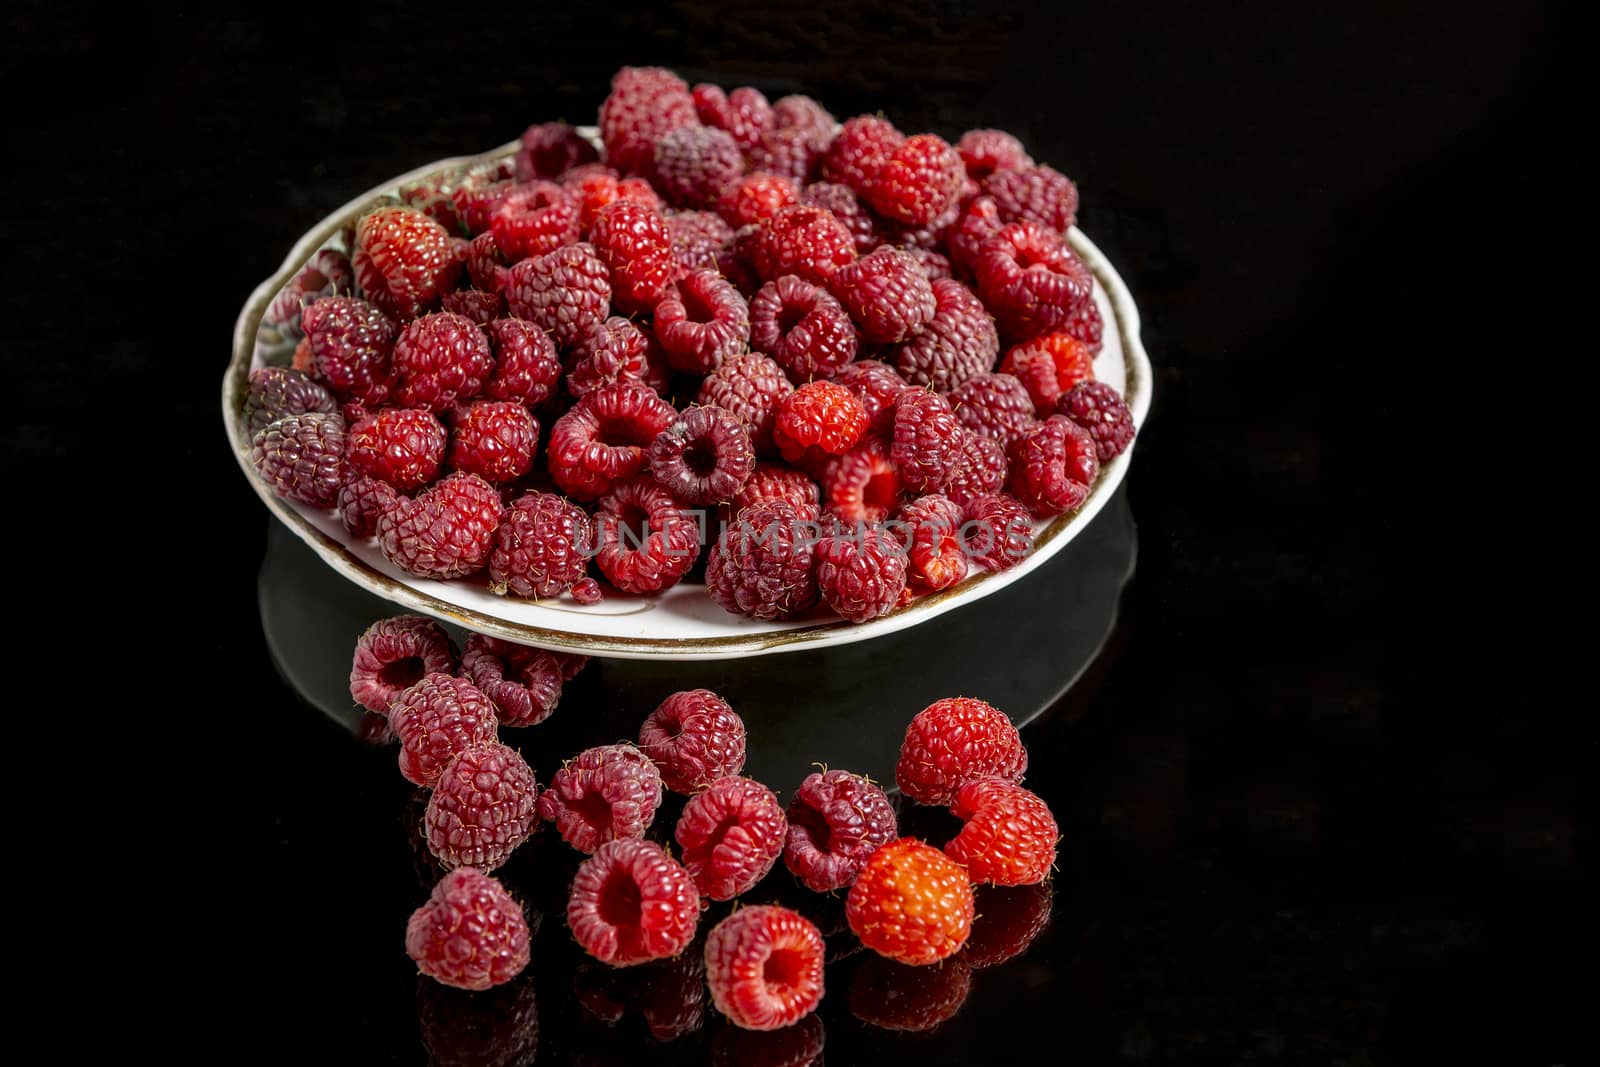 Fresh raspberries on a plate against a black background with ref by ben44